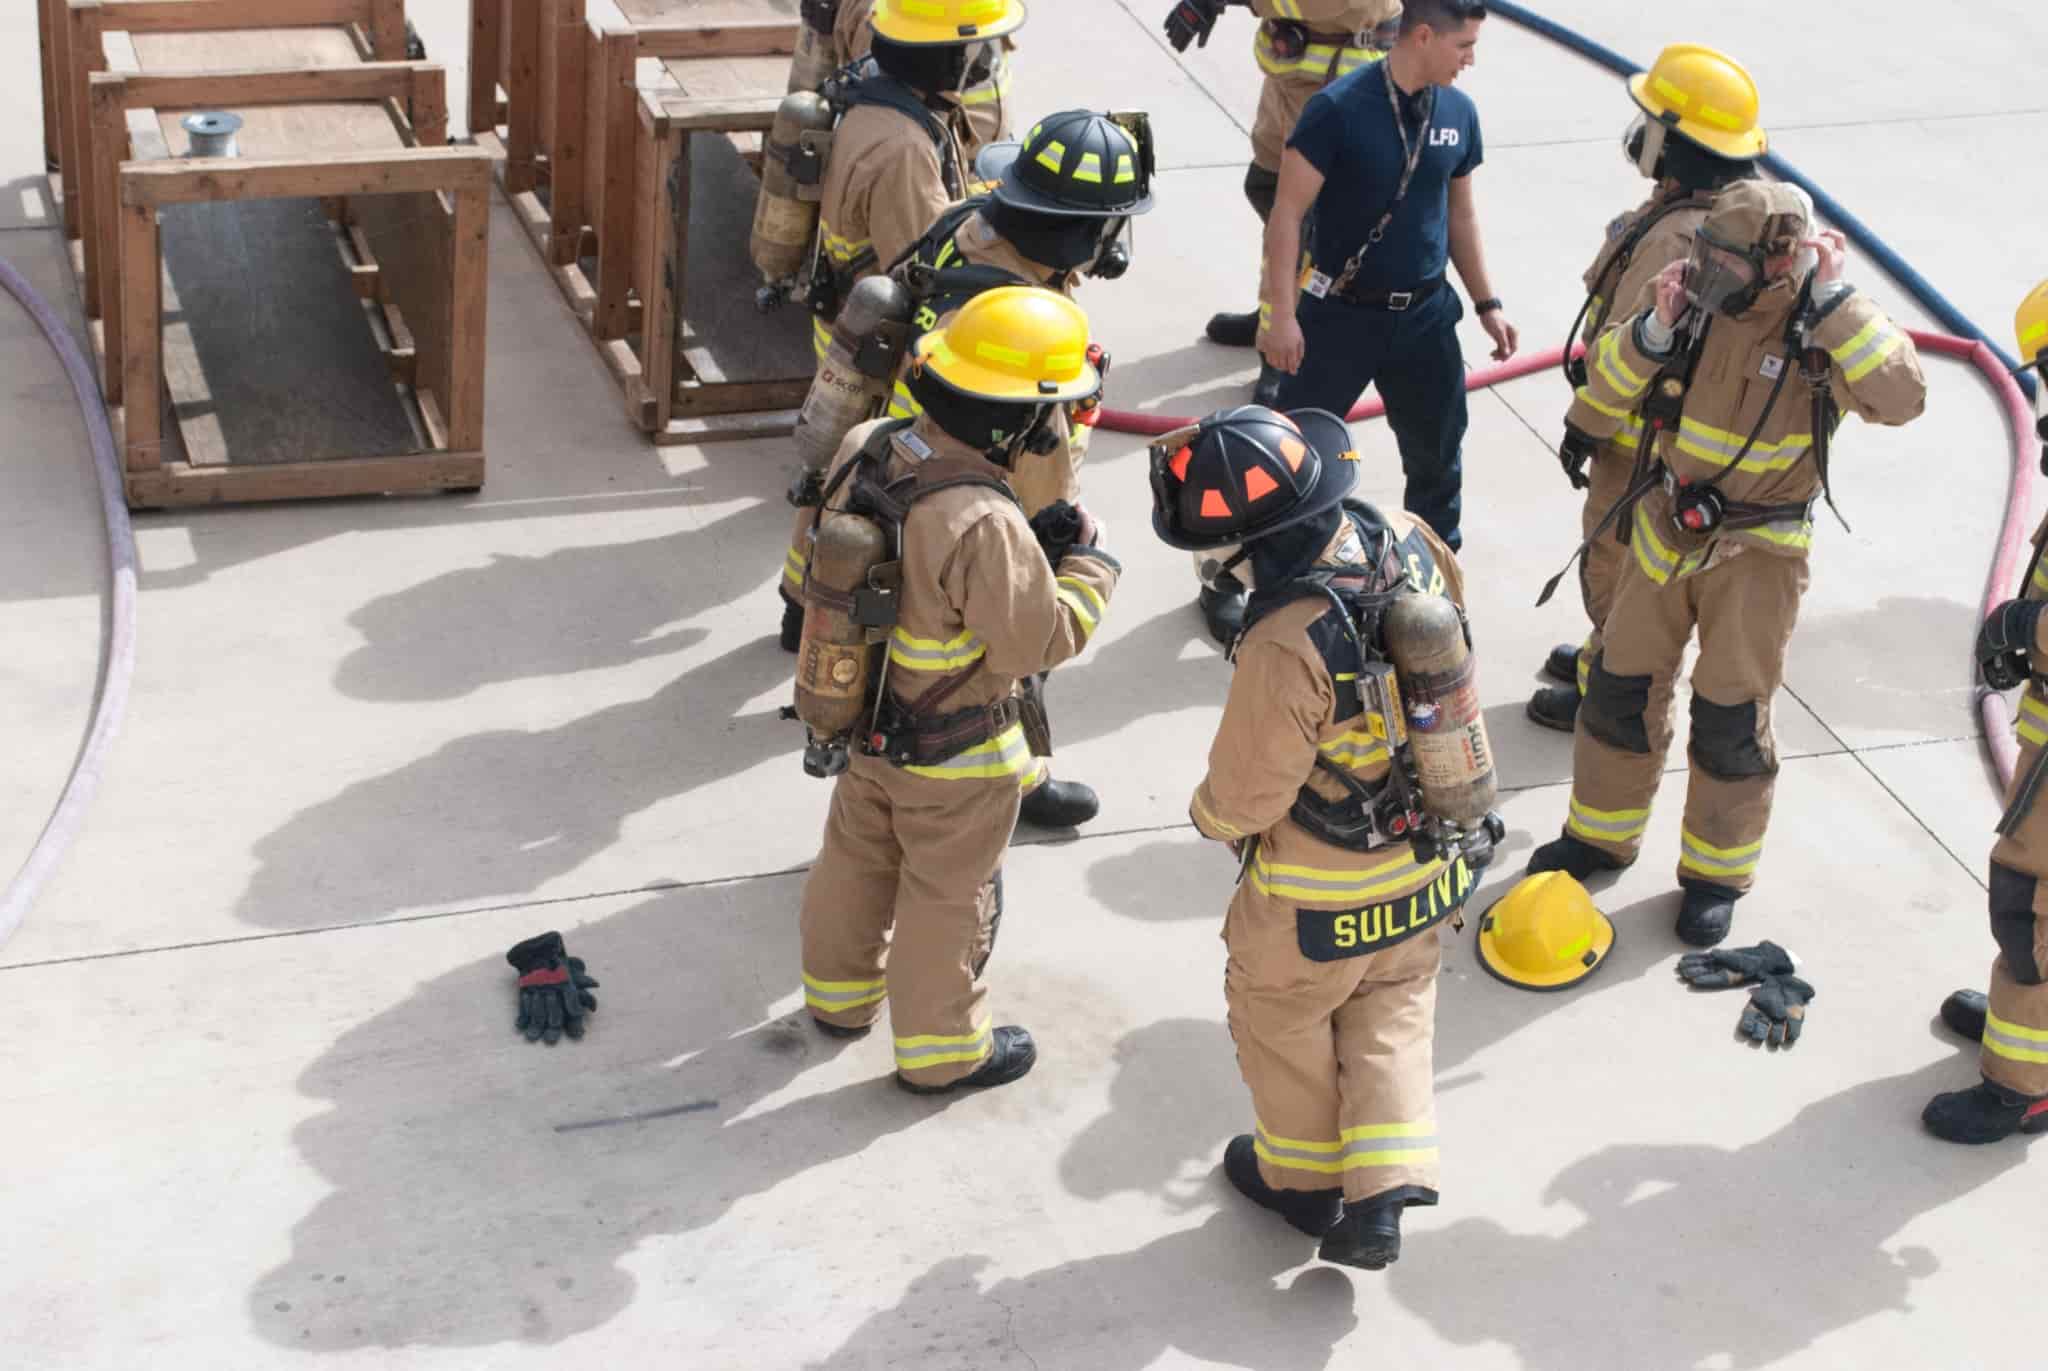 Firefighters training as a group.